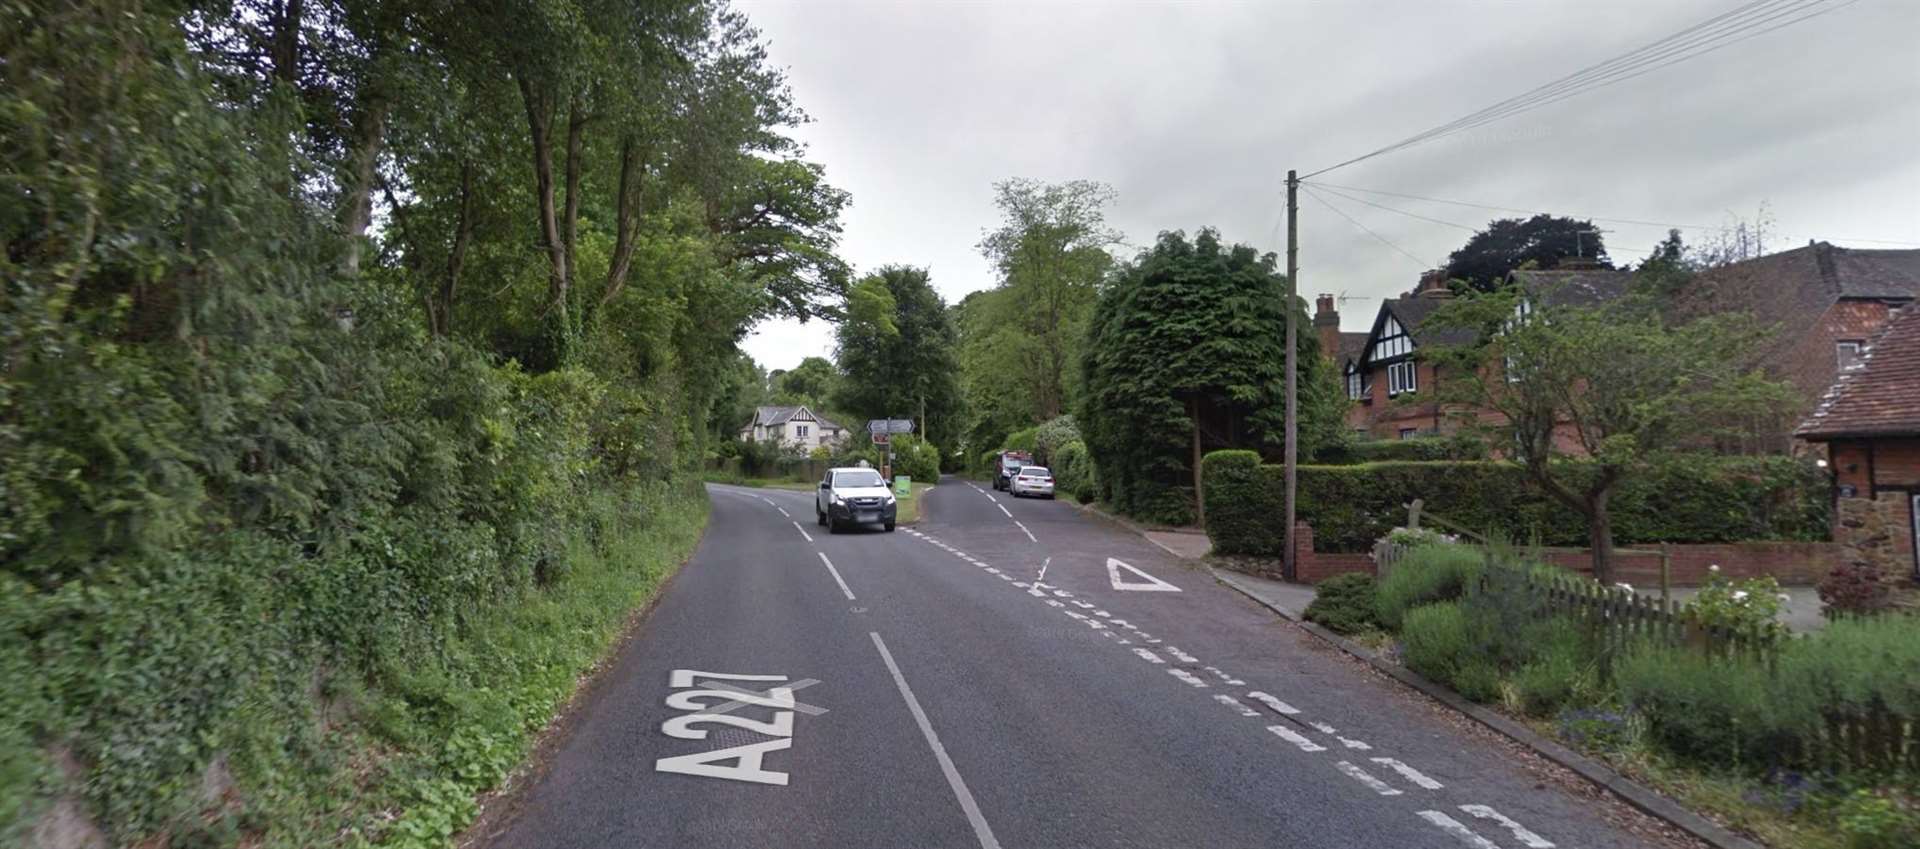 The A227 Ightham Road. Picture: Google Street View